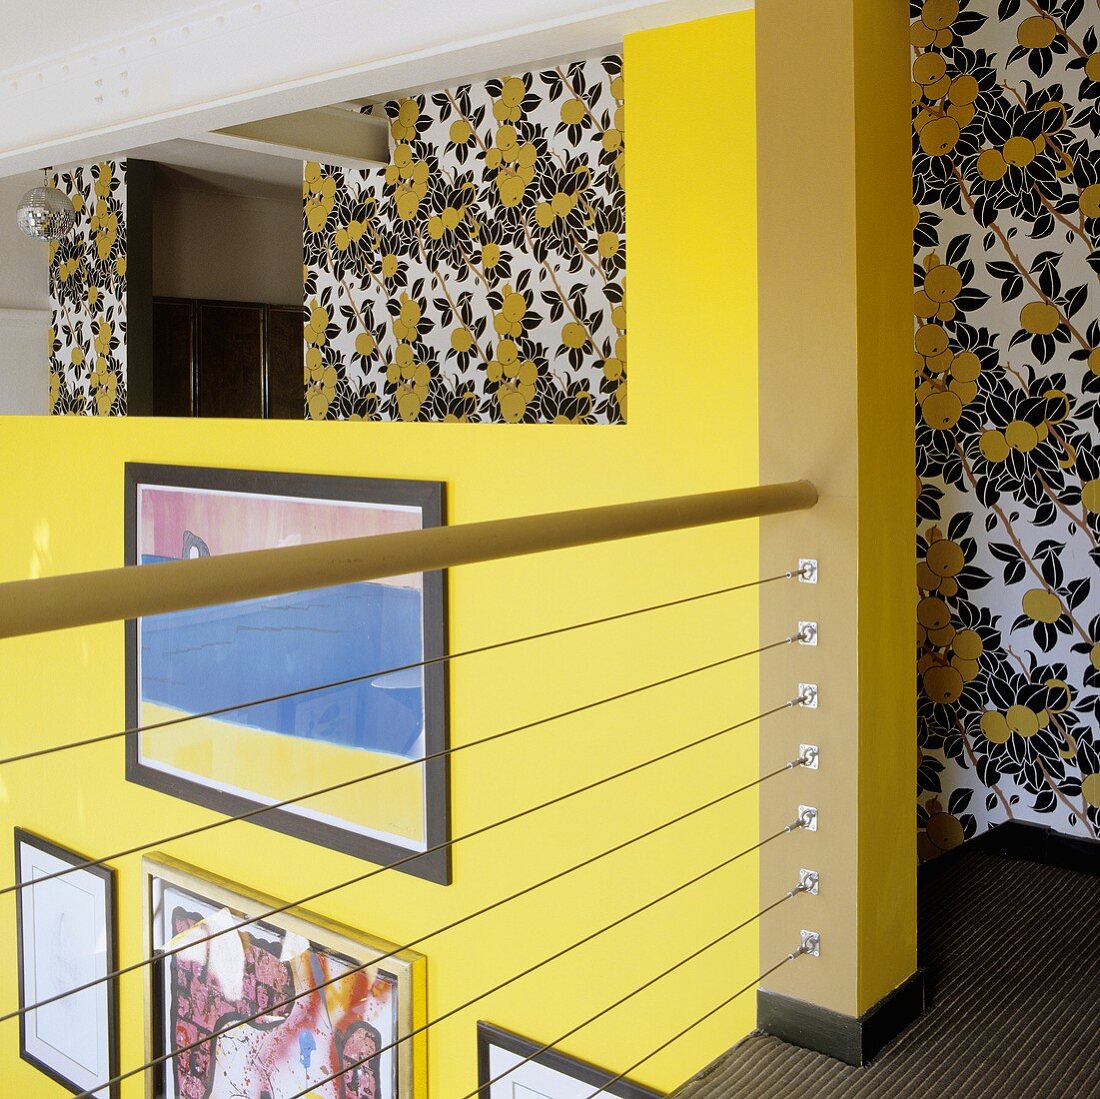 A gallery with view onto a yellow wall and a wall with a floral patterned wallpaper